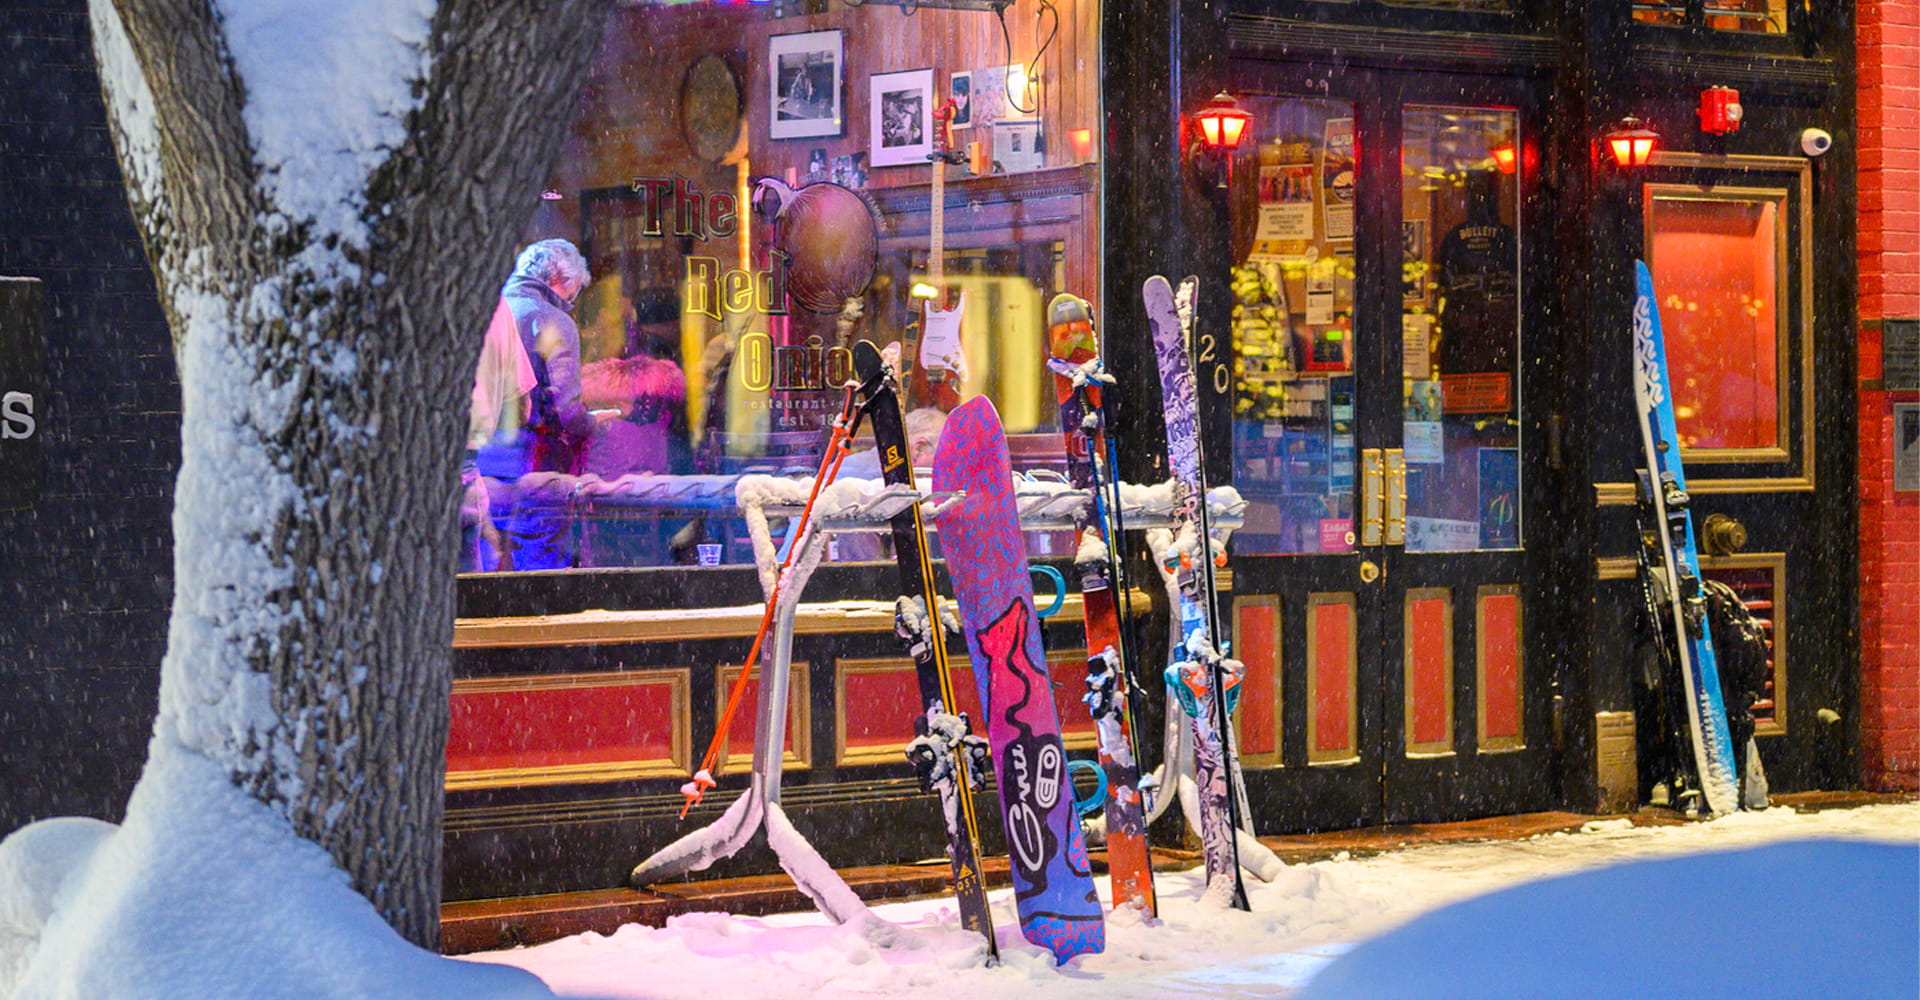 Skis outside a locals favorite shop and restaurant